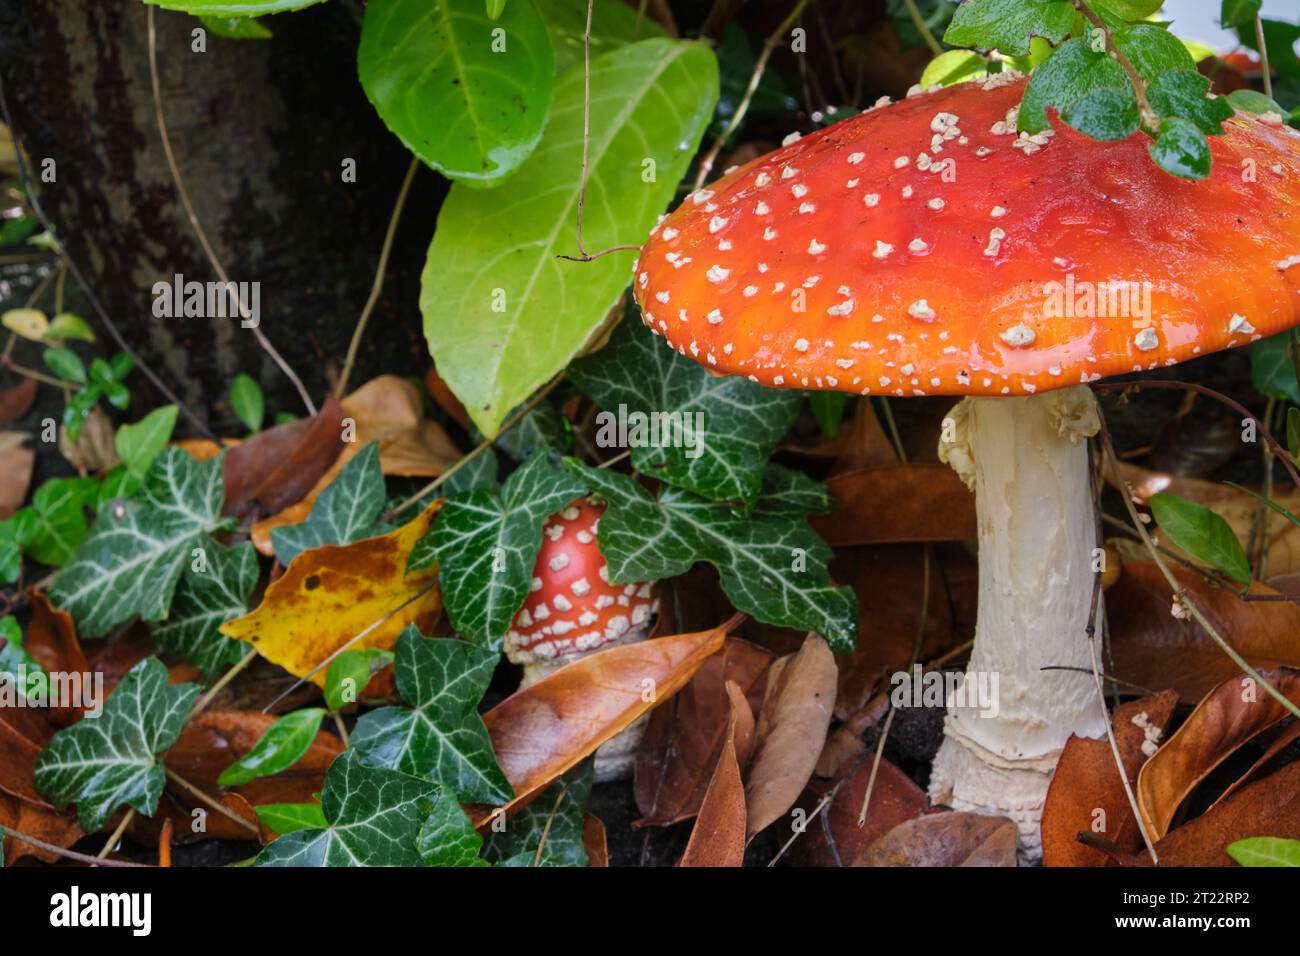 Two fly agaric mushroom (Amanita muscaria) fruiting bodies in early stage and fully developed stage surrounded by ivy (Hedera helix) Stock Photo